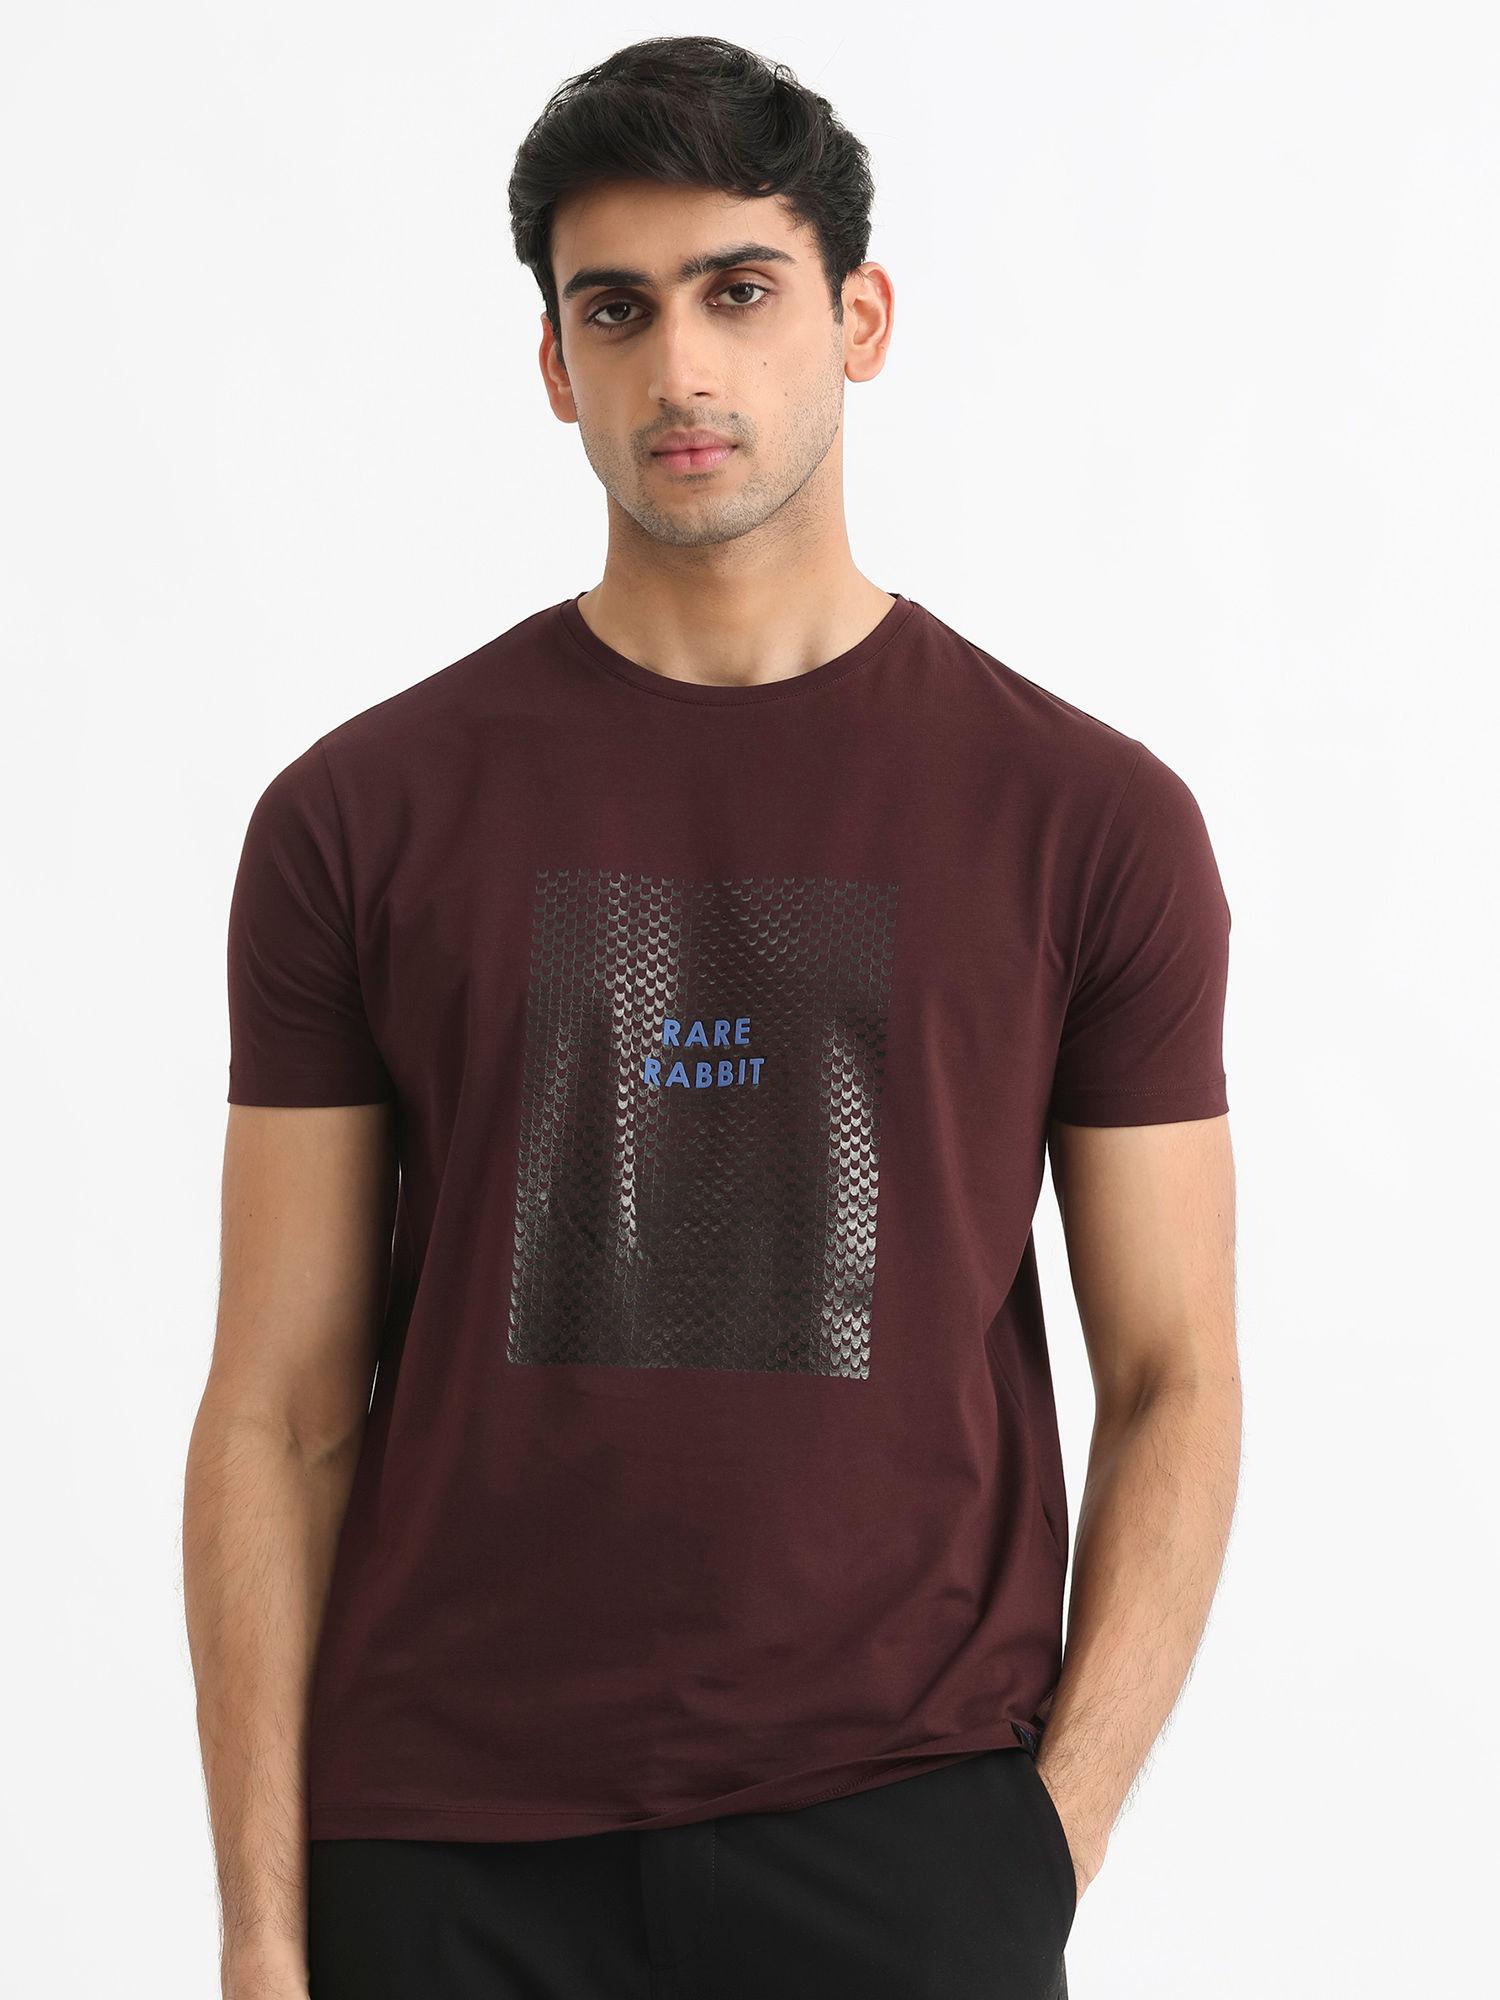 gregory primary maroon graphic t-shirt